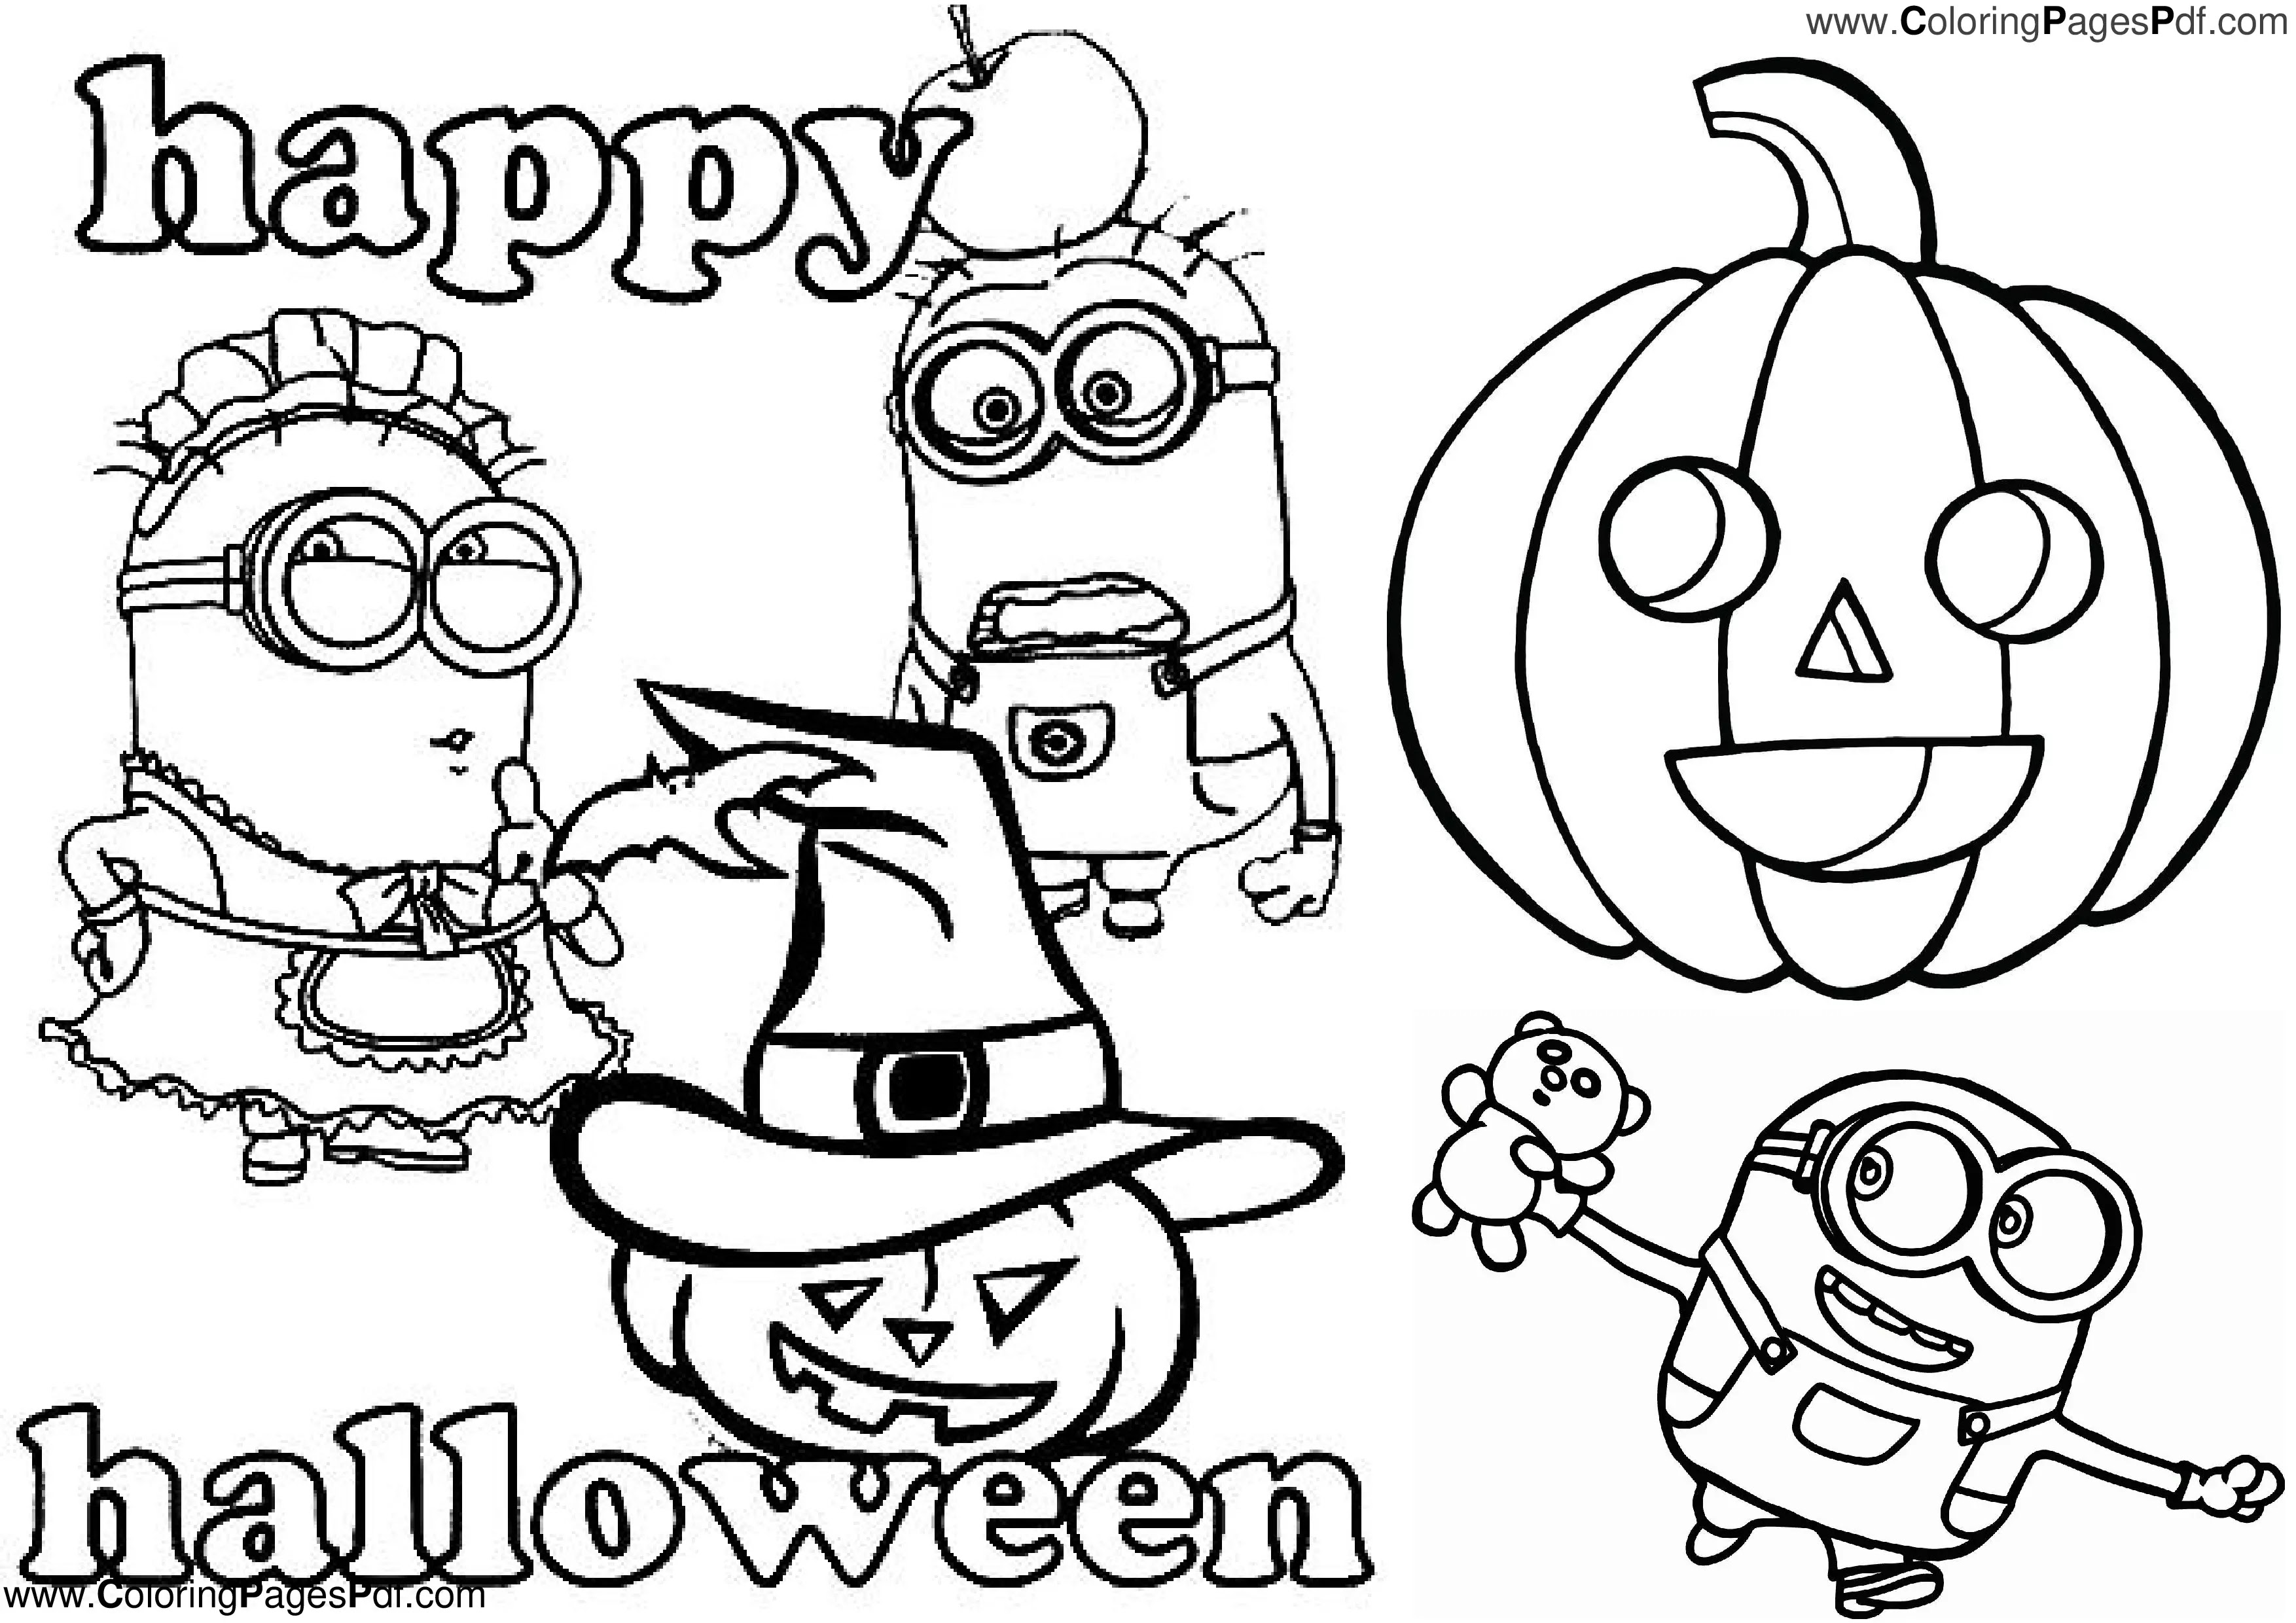 Minion coloring pages halloween